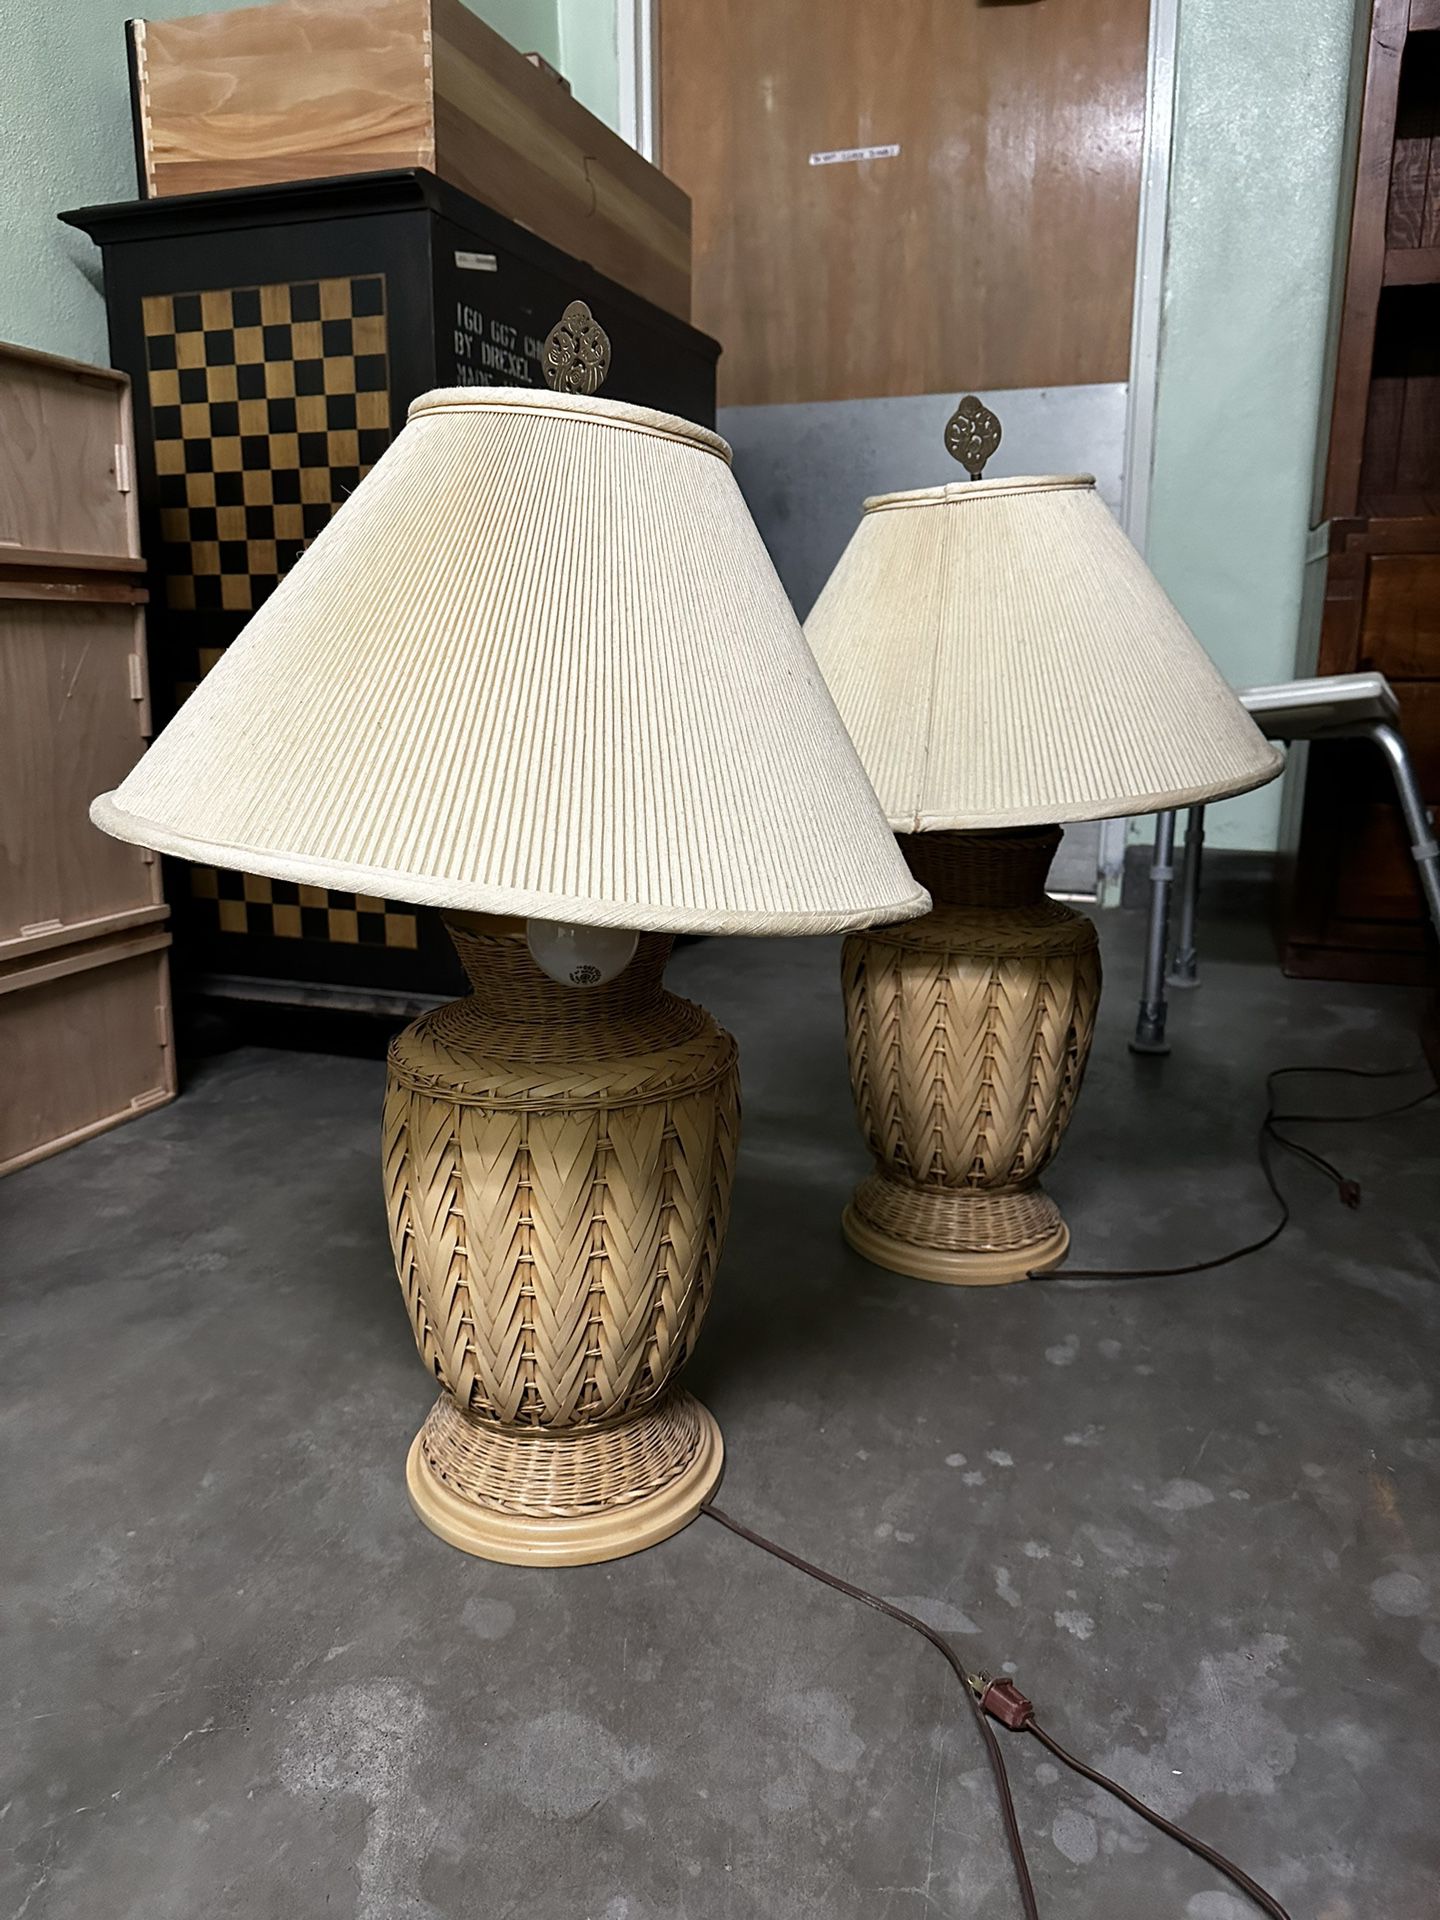 Vintage Wicker Woven Lamps - A Pair